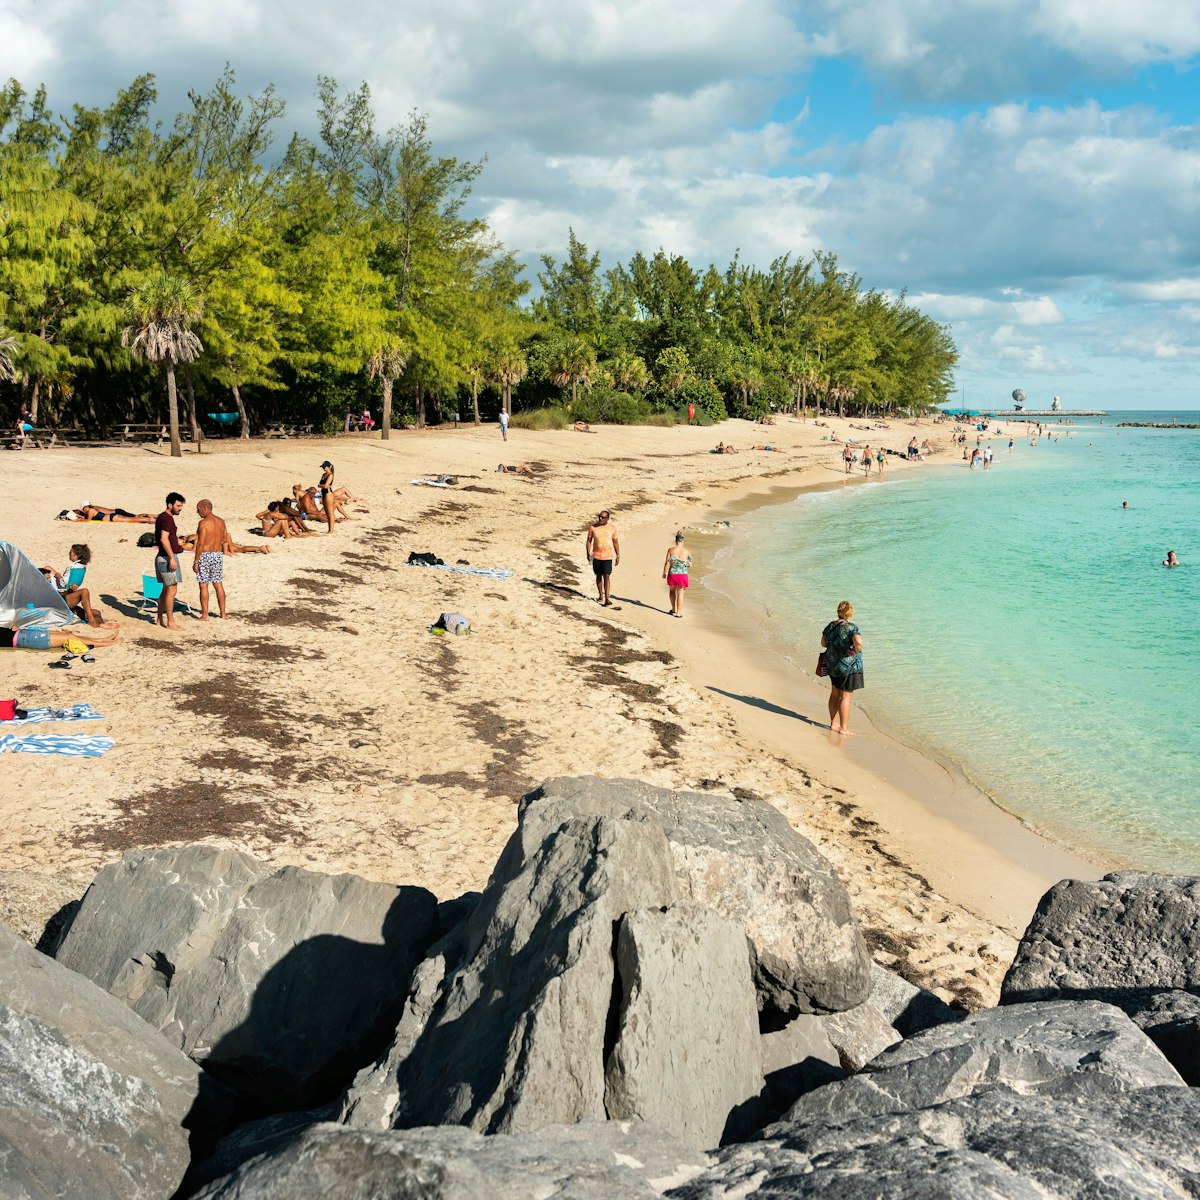 Key West, Florida - December 4, 2019:  People tan and rest on the sunny beach of Fort Zachary Taylor State Park in tropical Key West Florida USA